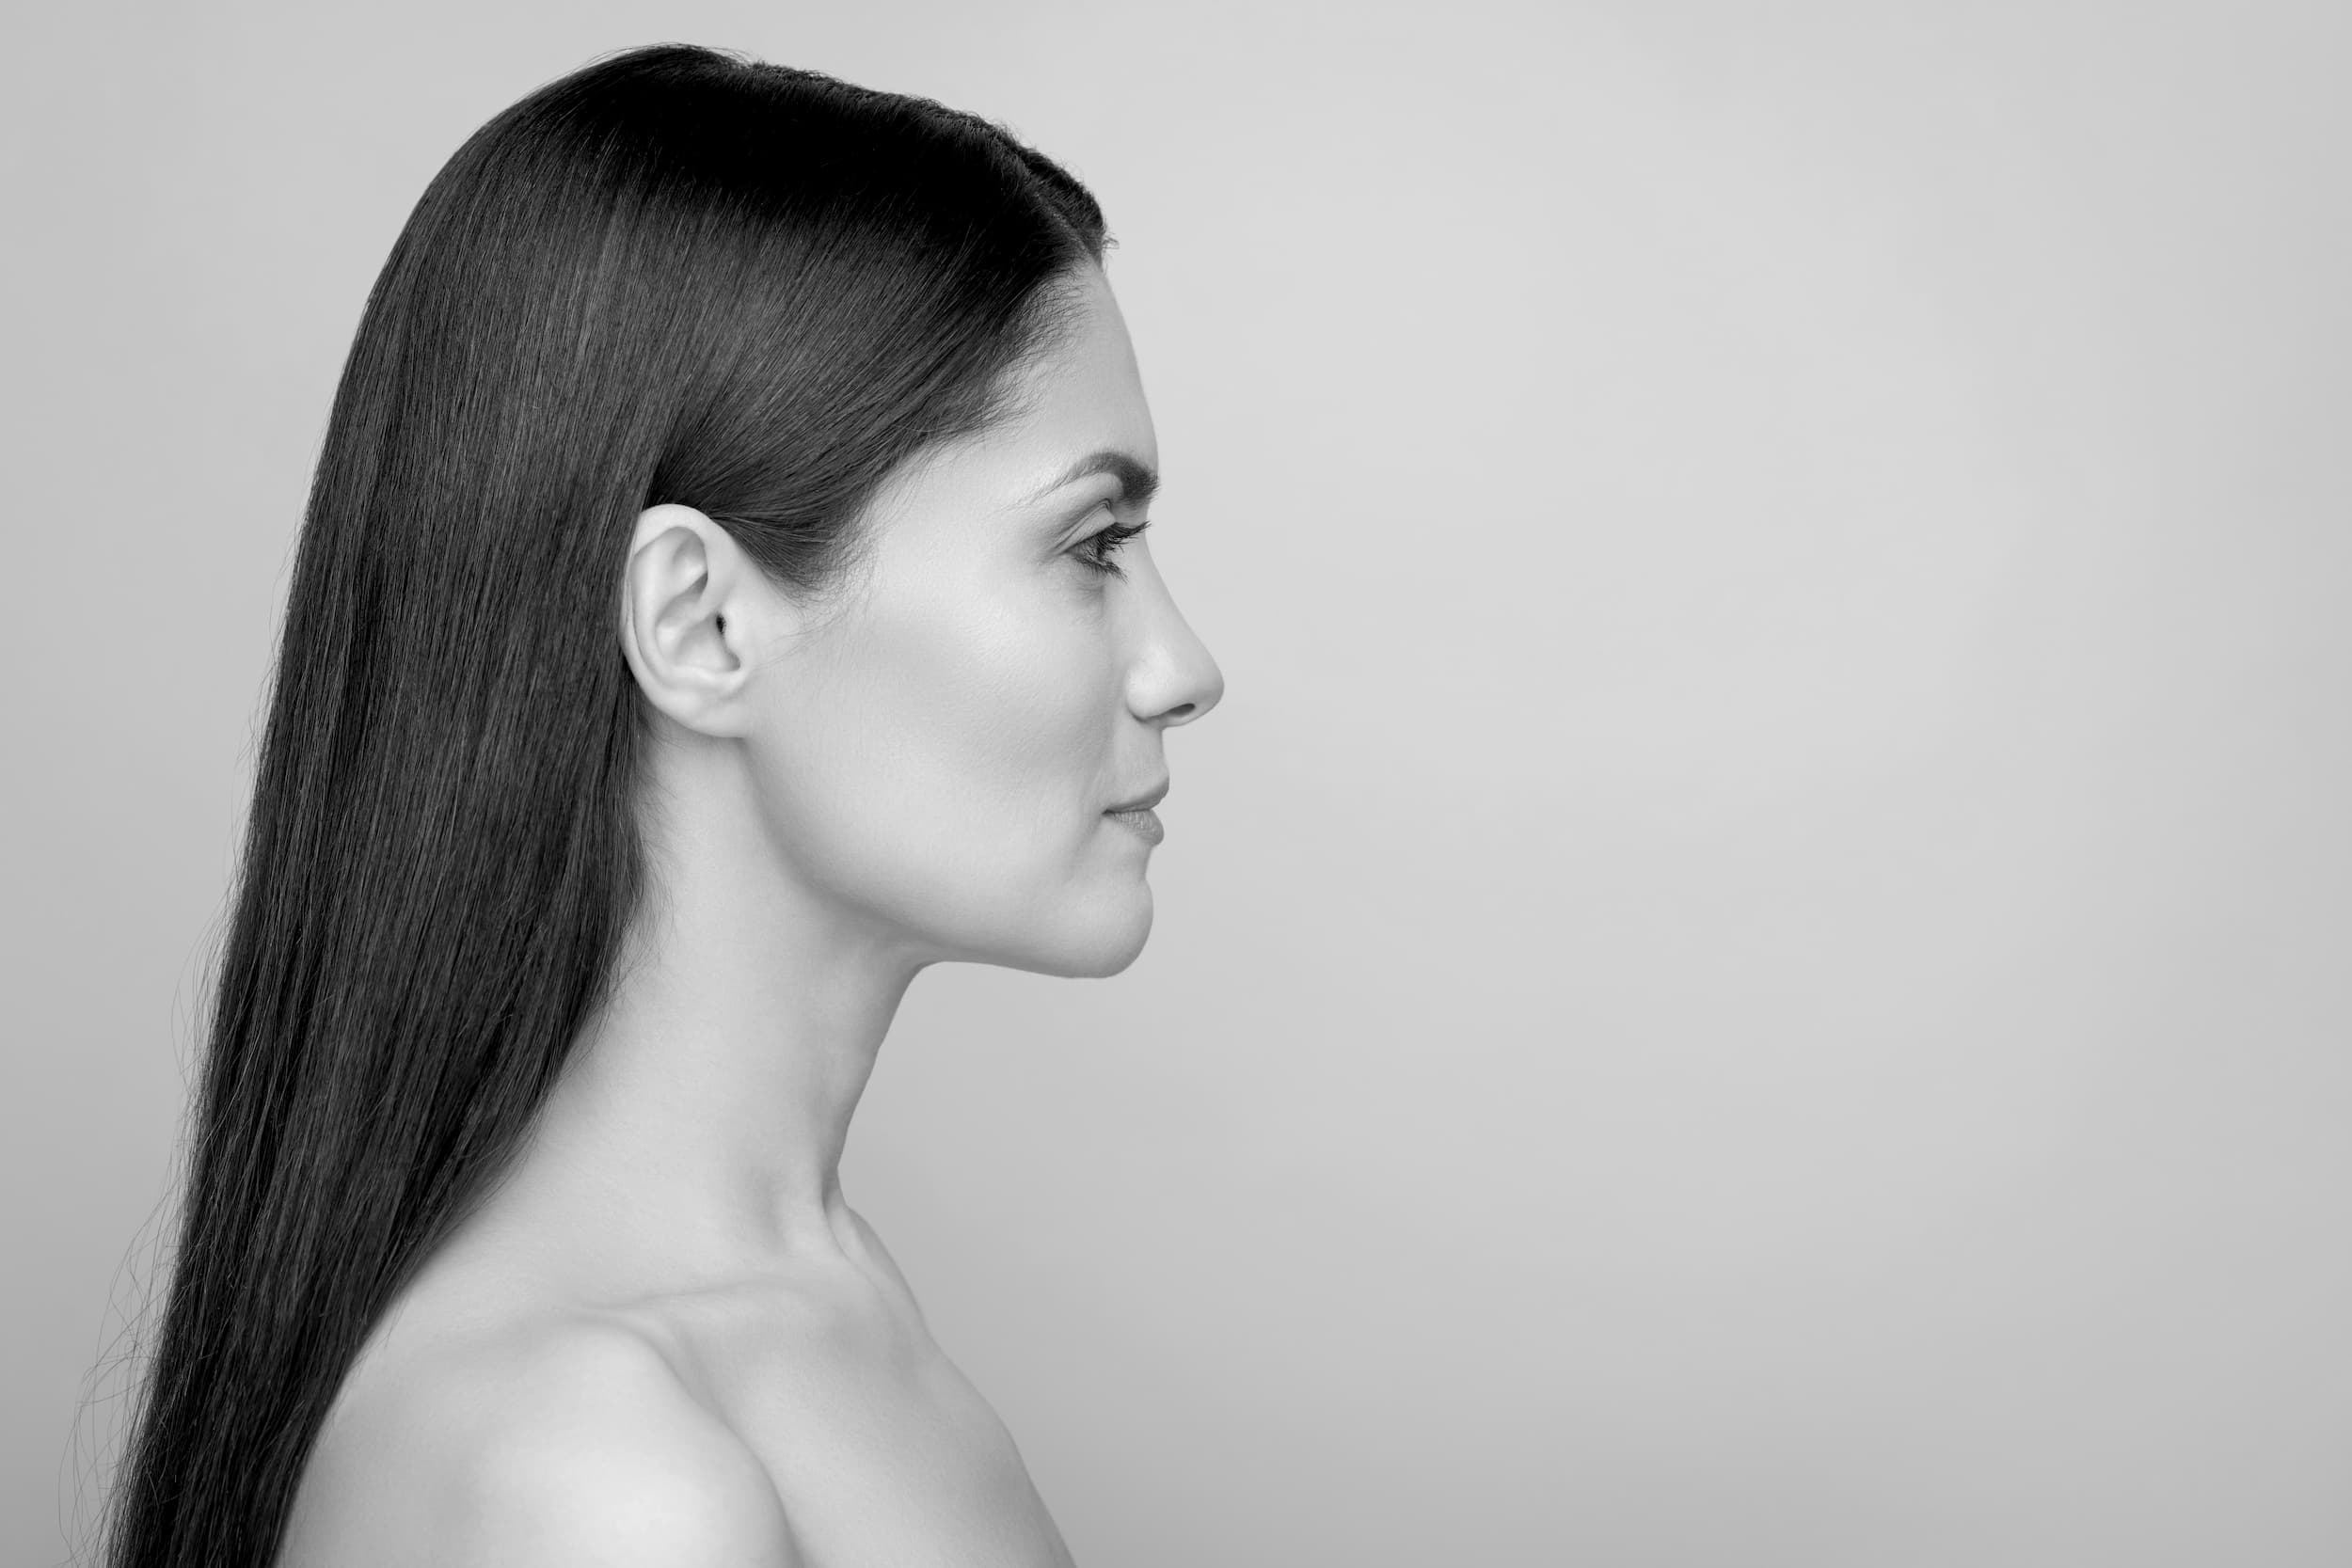 profile view of woman's nose